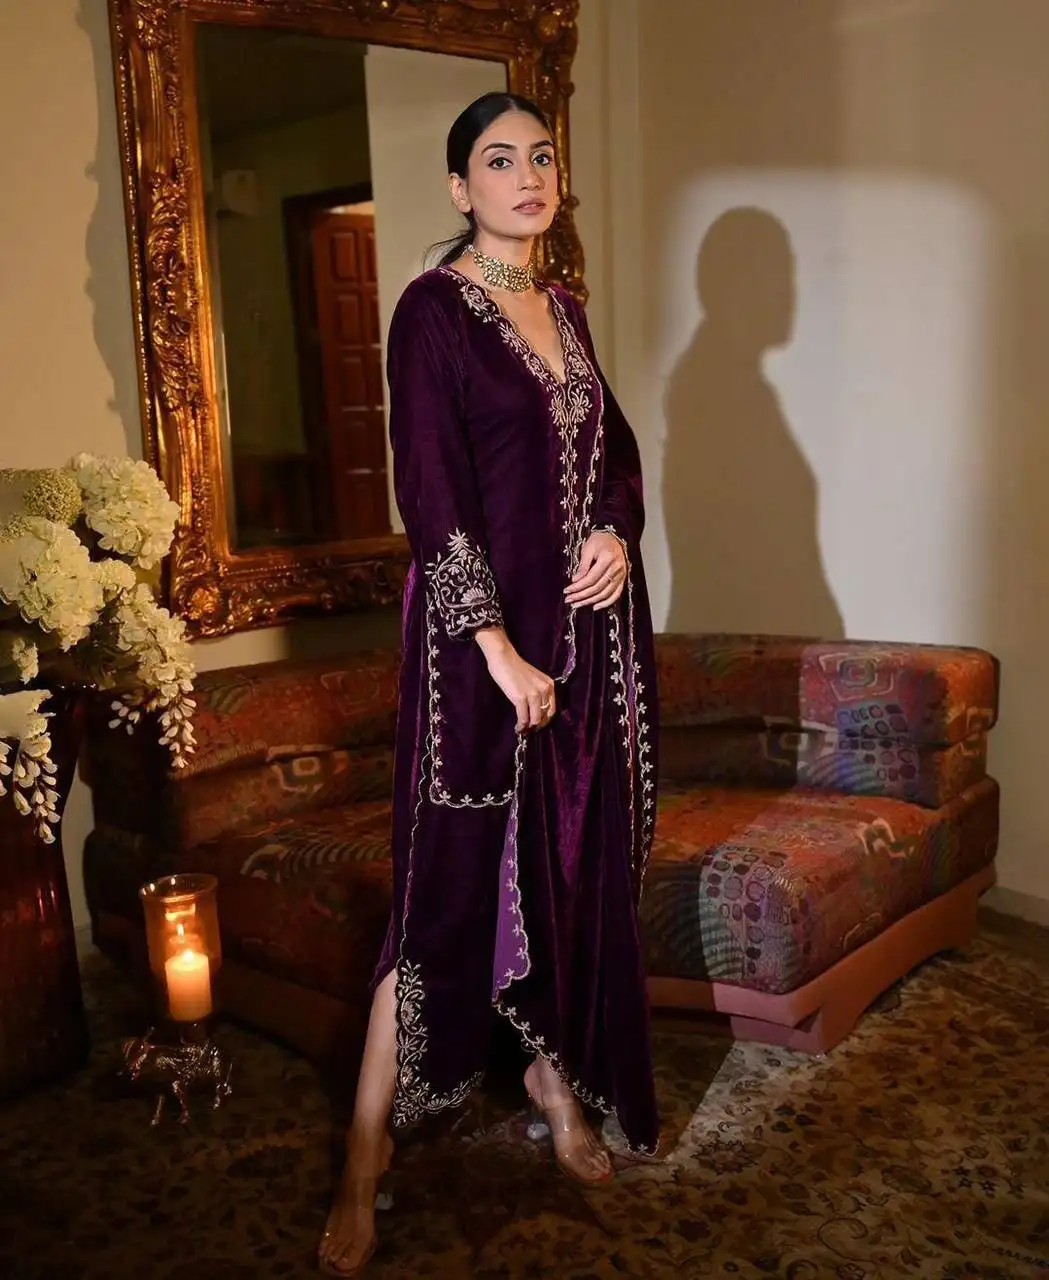 WINTER AND WEDDING SEASON VELVET CORDING EMBROIDERY WORK SALWAR SUIT PANT WITH DUPATTA FOR WOMEN